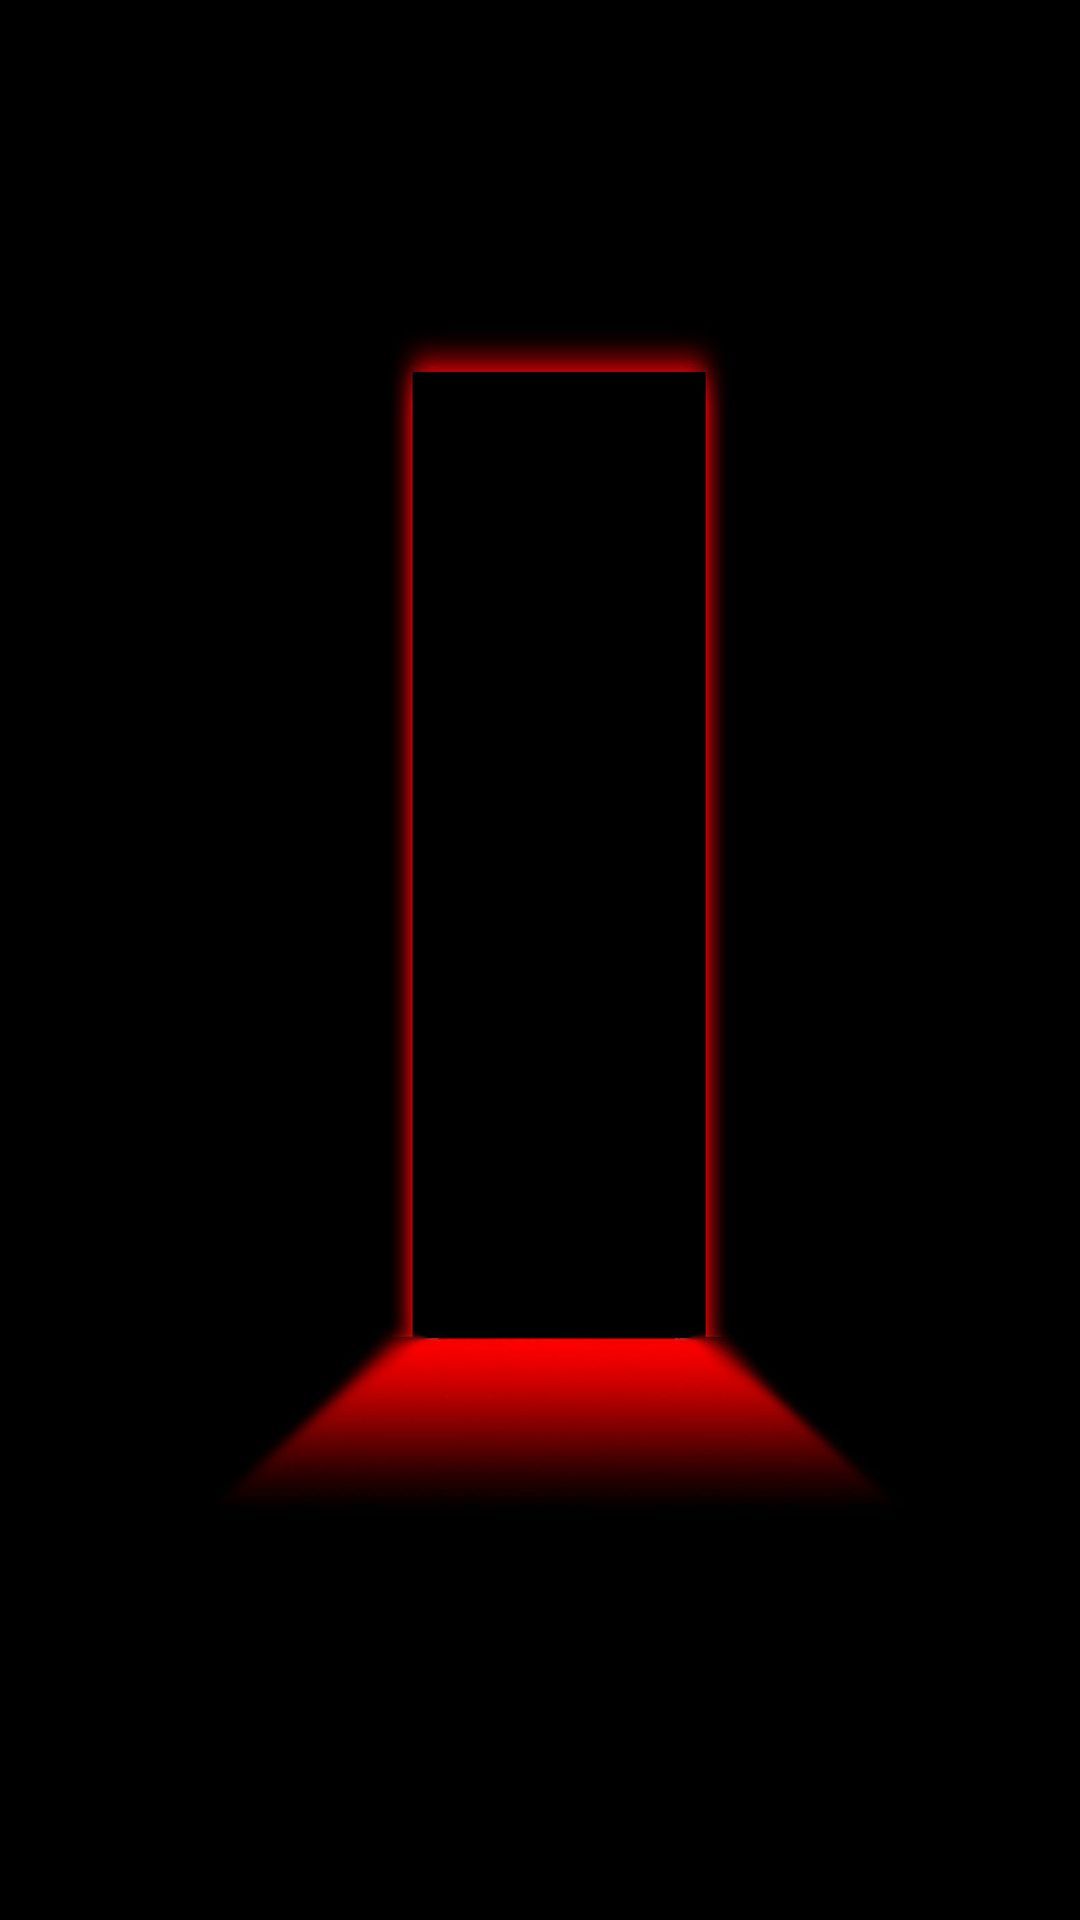 Red and Black iPhone Wallpaper Free Red and Black iPhone